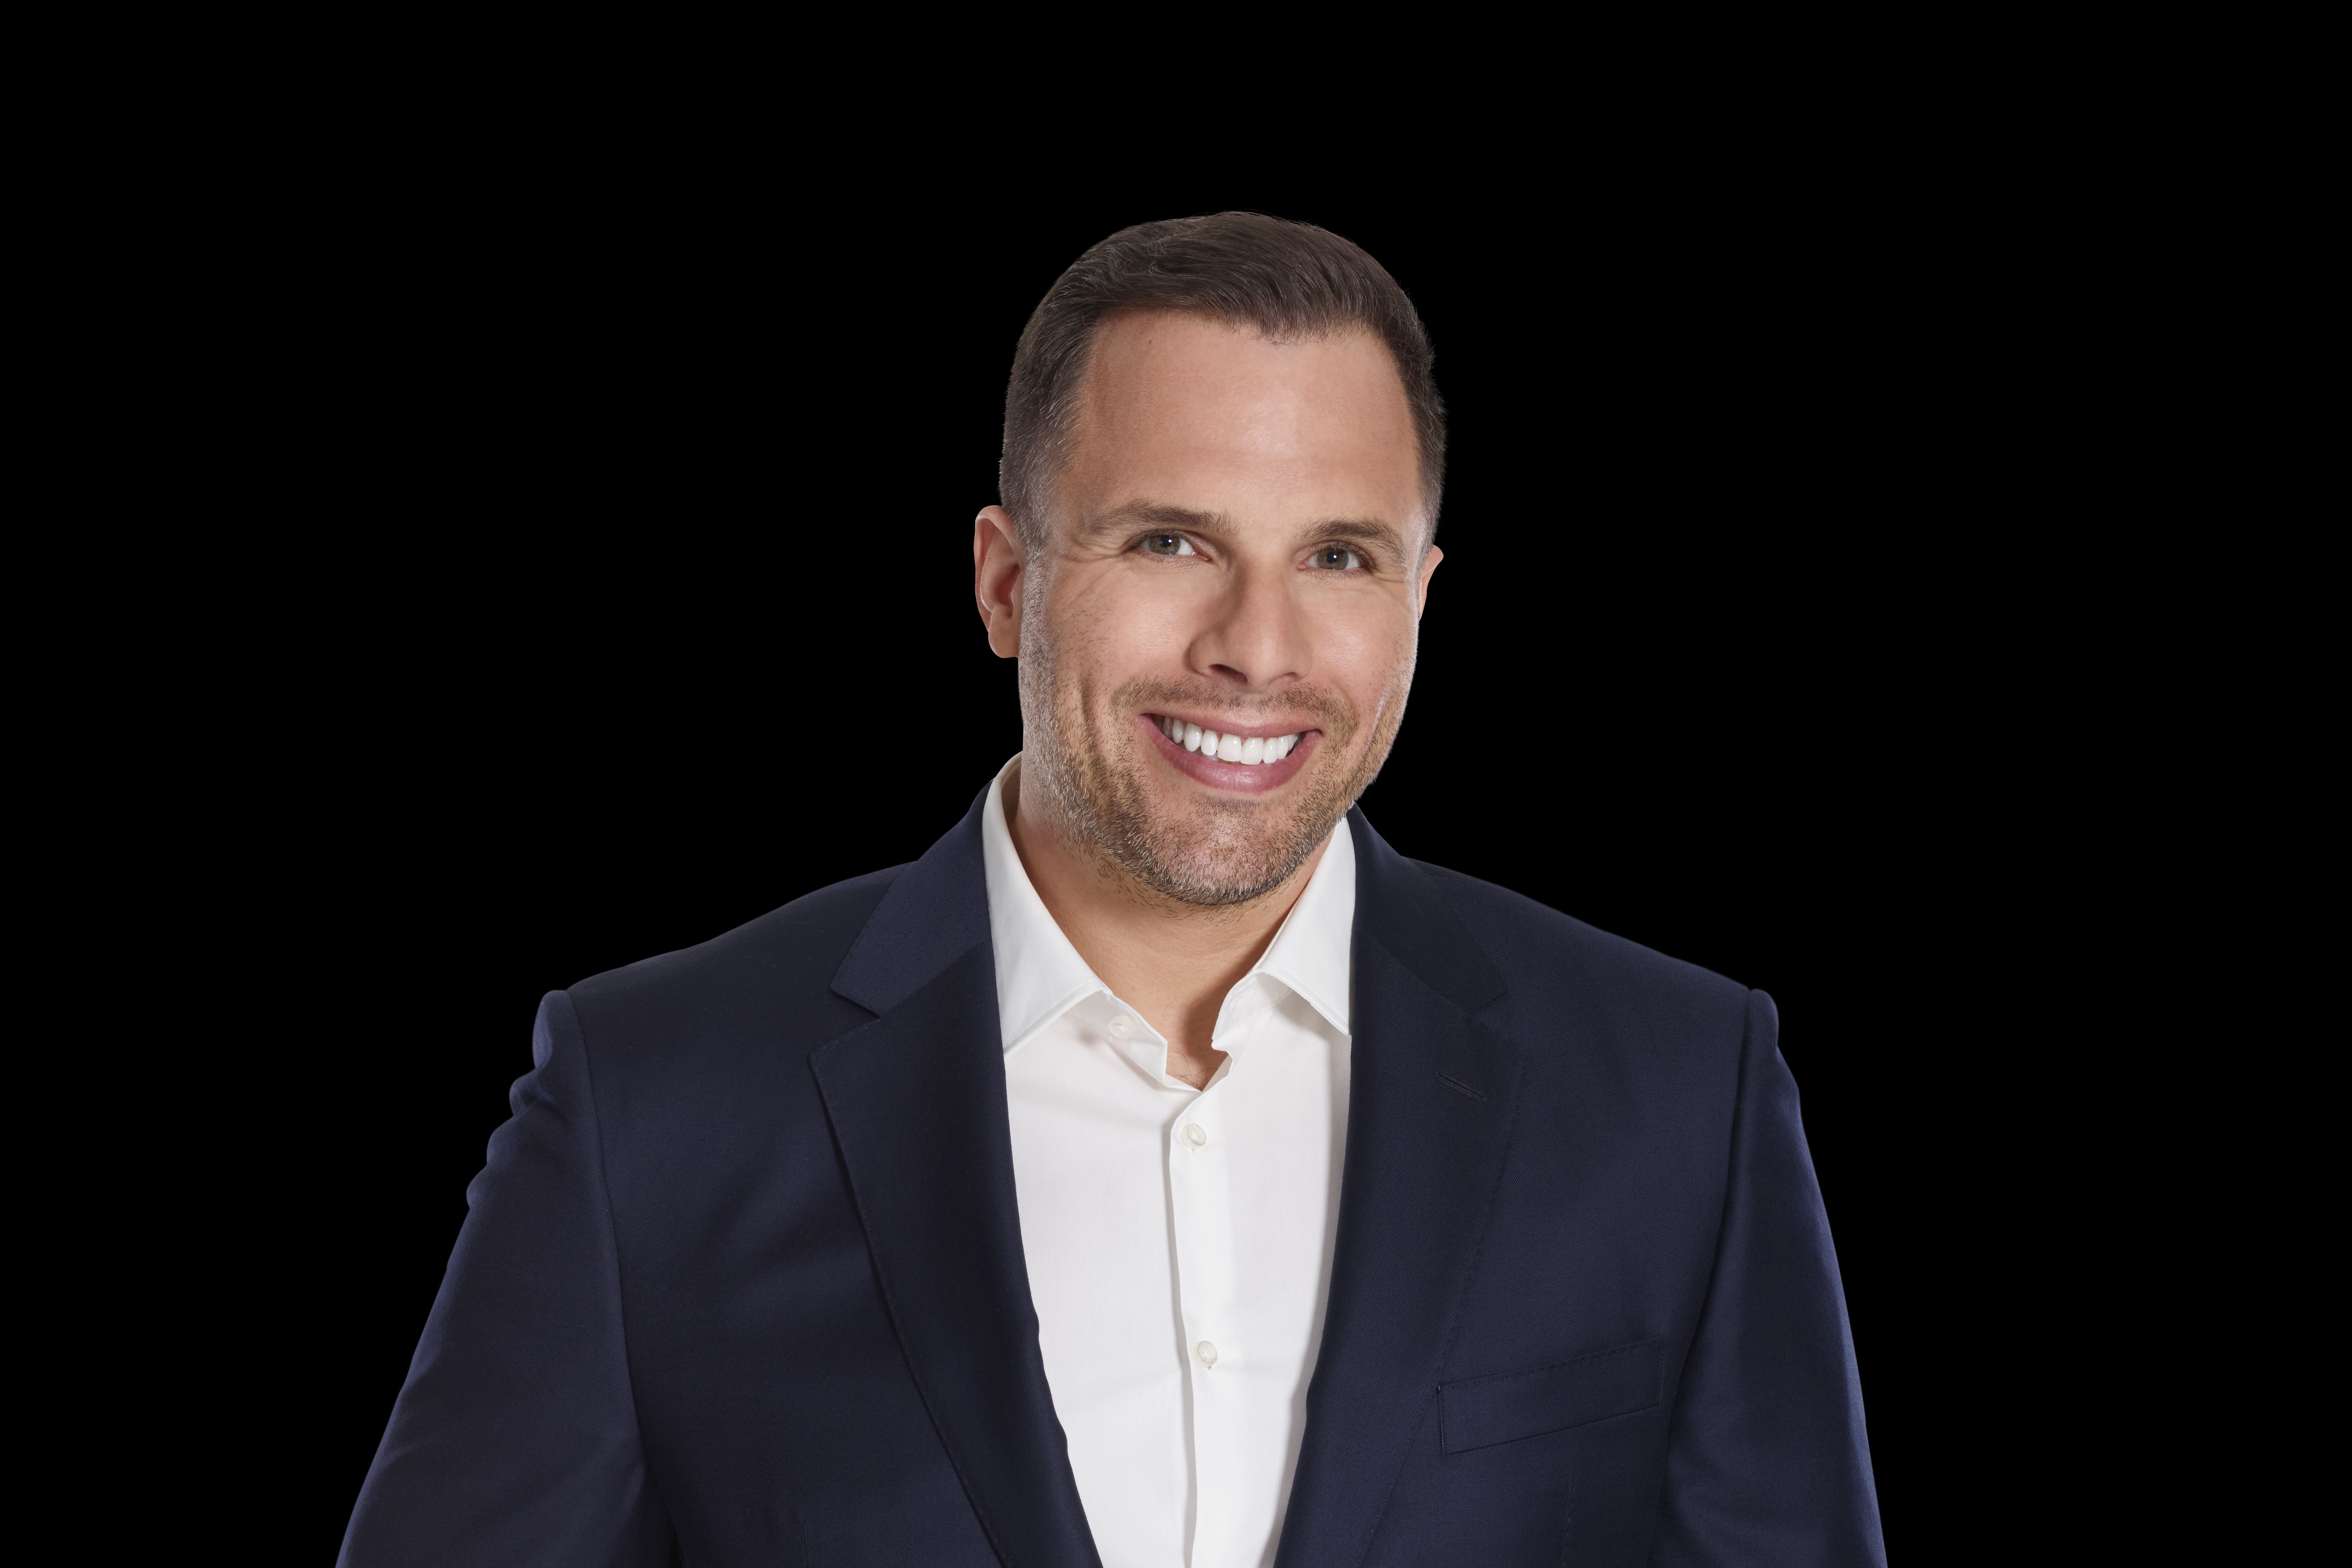 Presenter Dan Wootton was also suspended by the channel after the broadcast